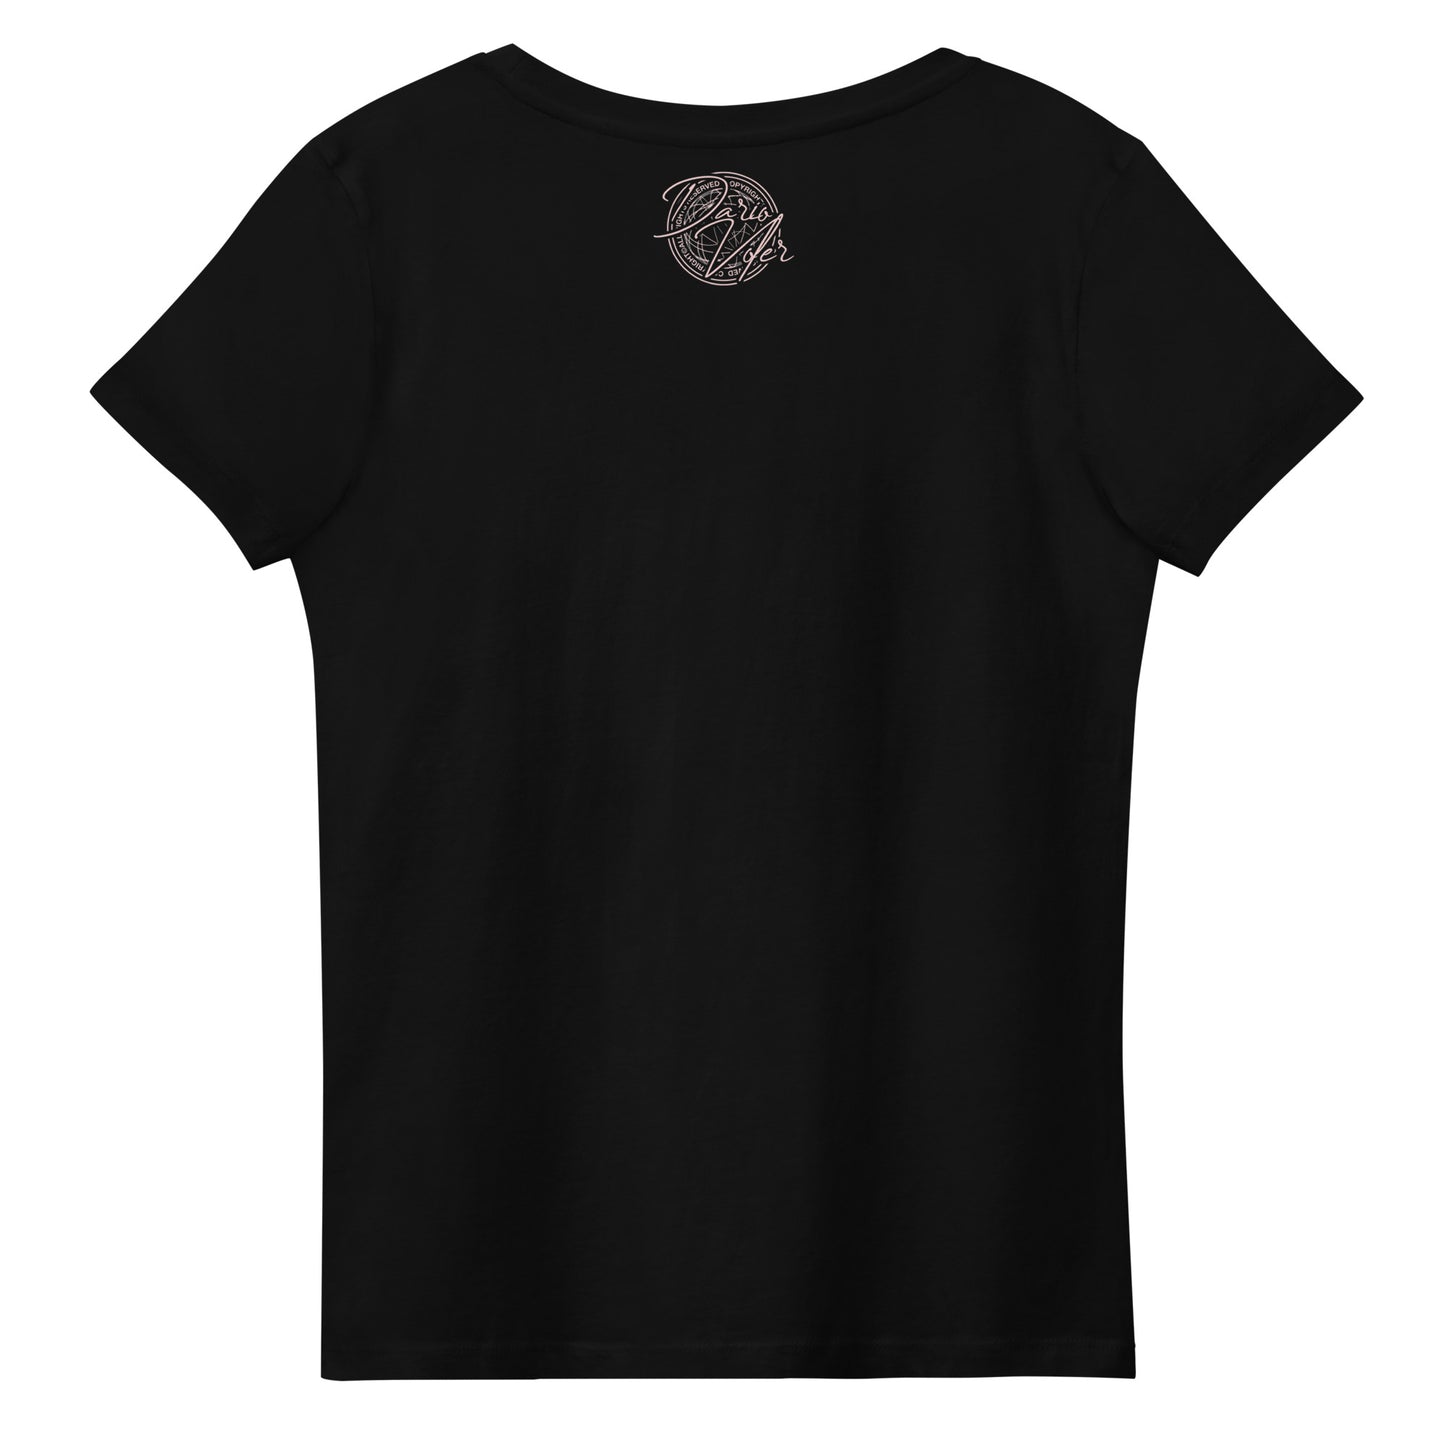 Women's Hustle Unleashed fitted tee